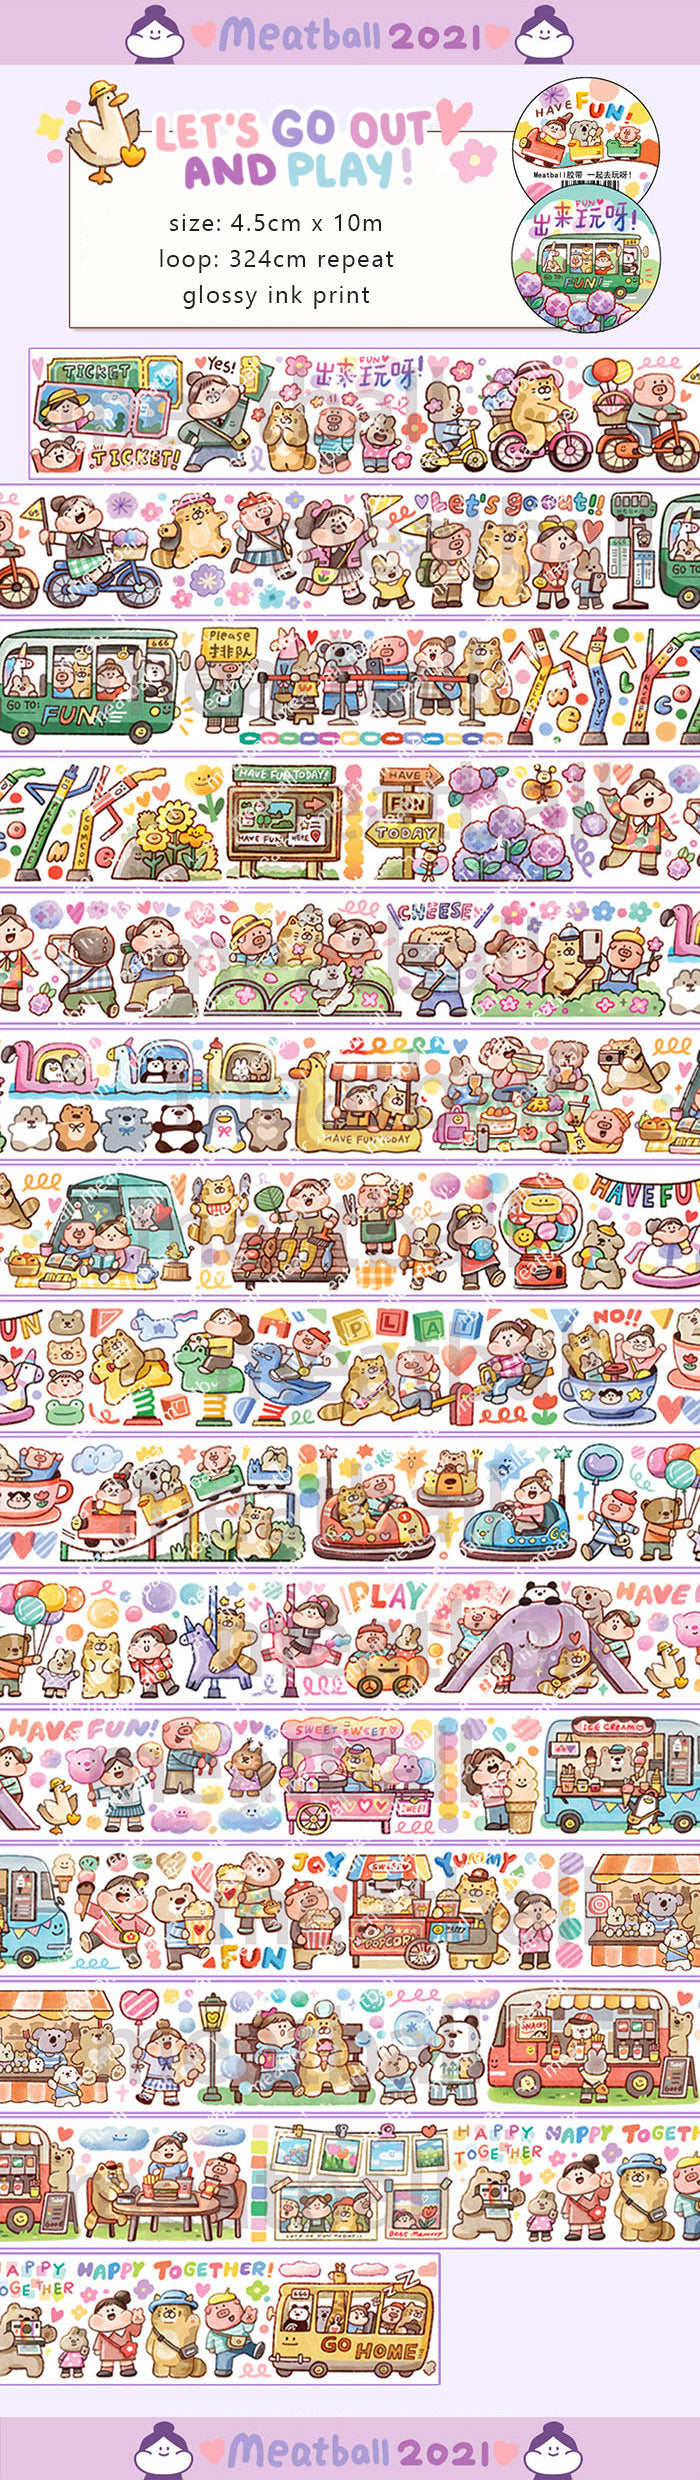 Meatball Washi Tape: Let's go out and play!